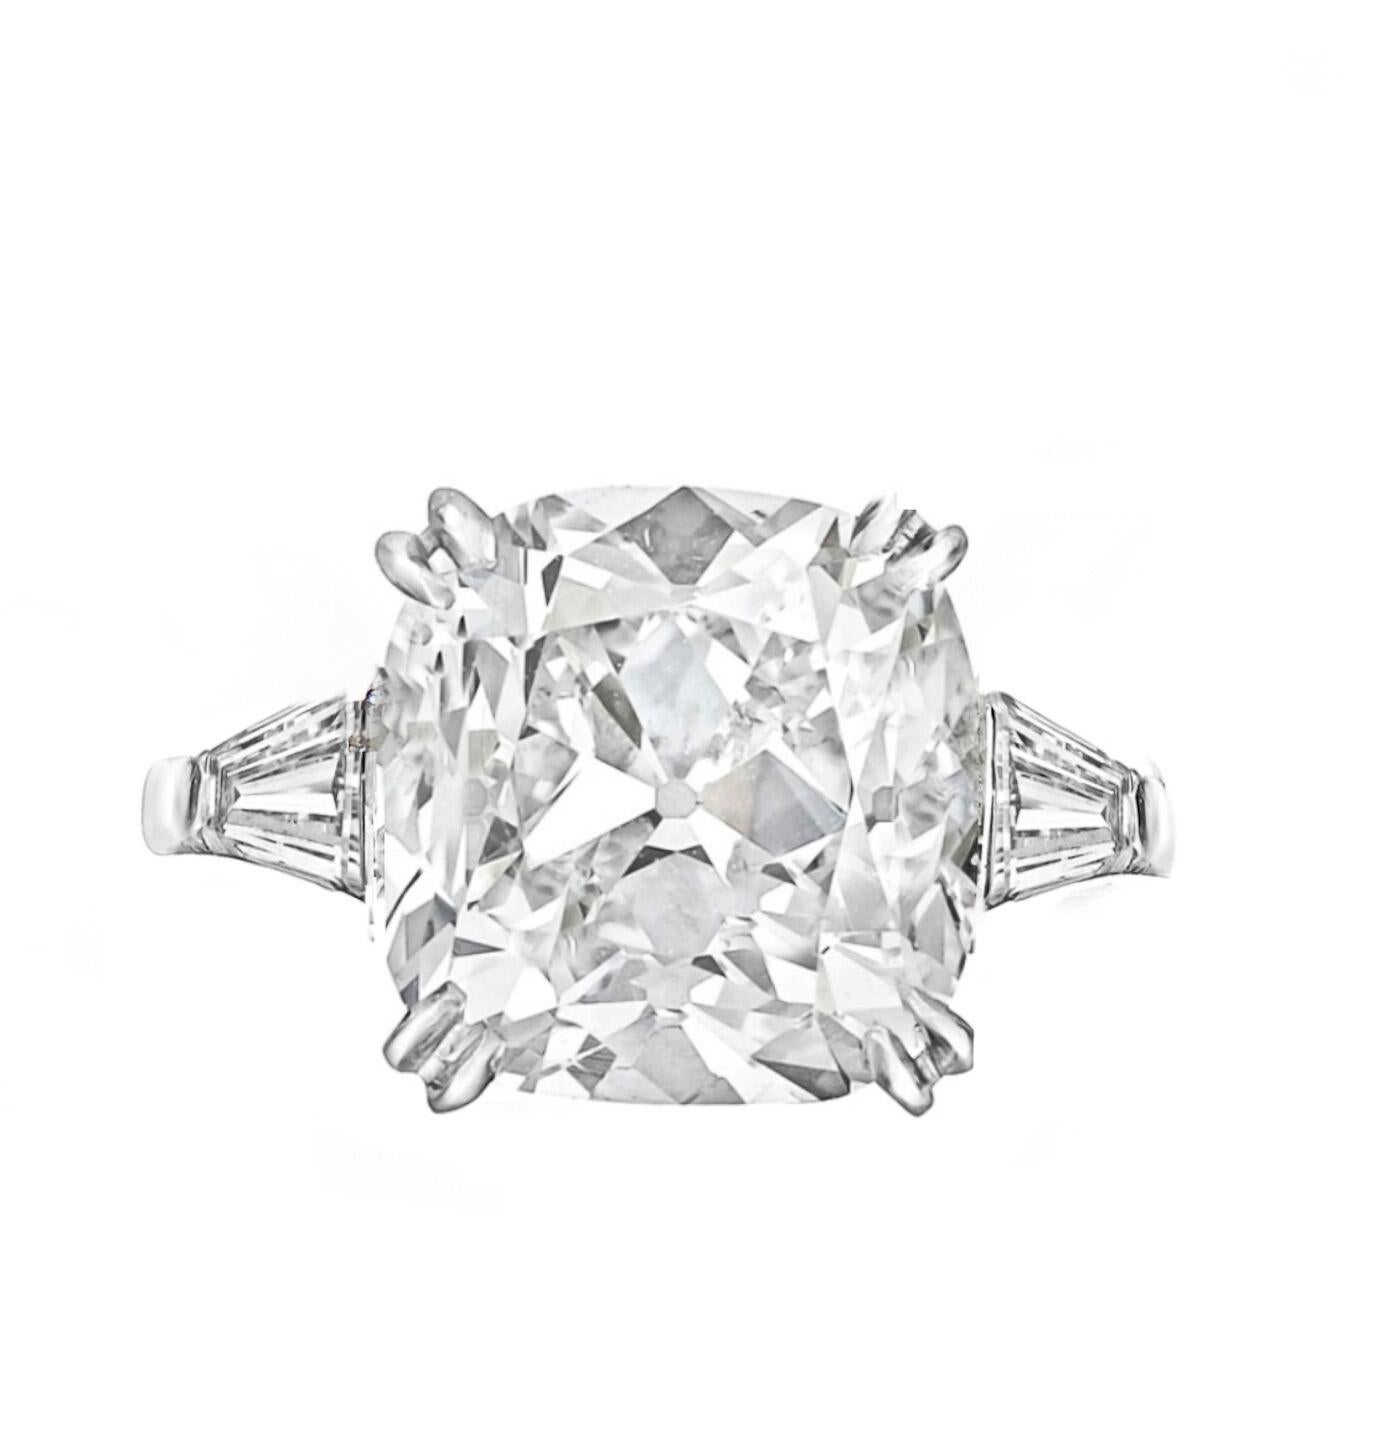 Diamond ring with (radc816) gia 5.52 rad fsi2 center diamond set in a platinum setting with two tapered baguettes (.75ct) on each side. 
